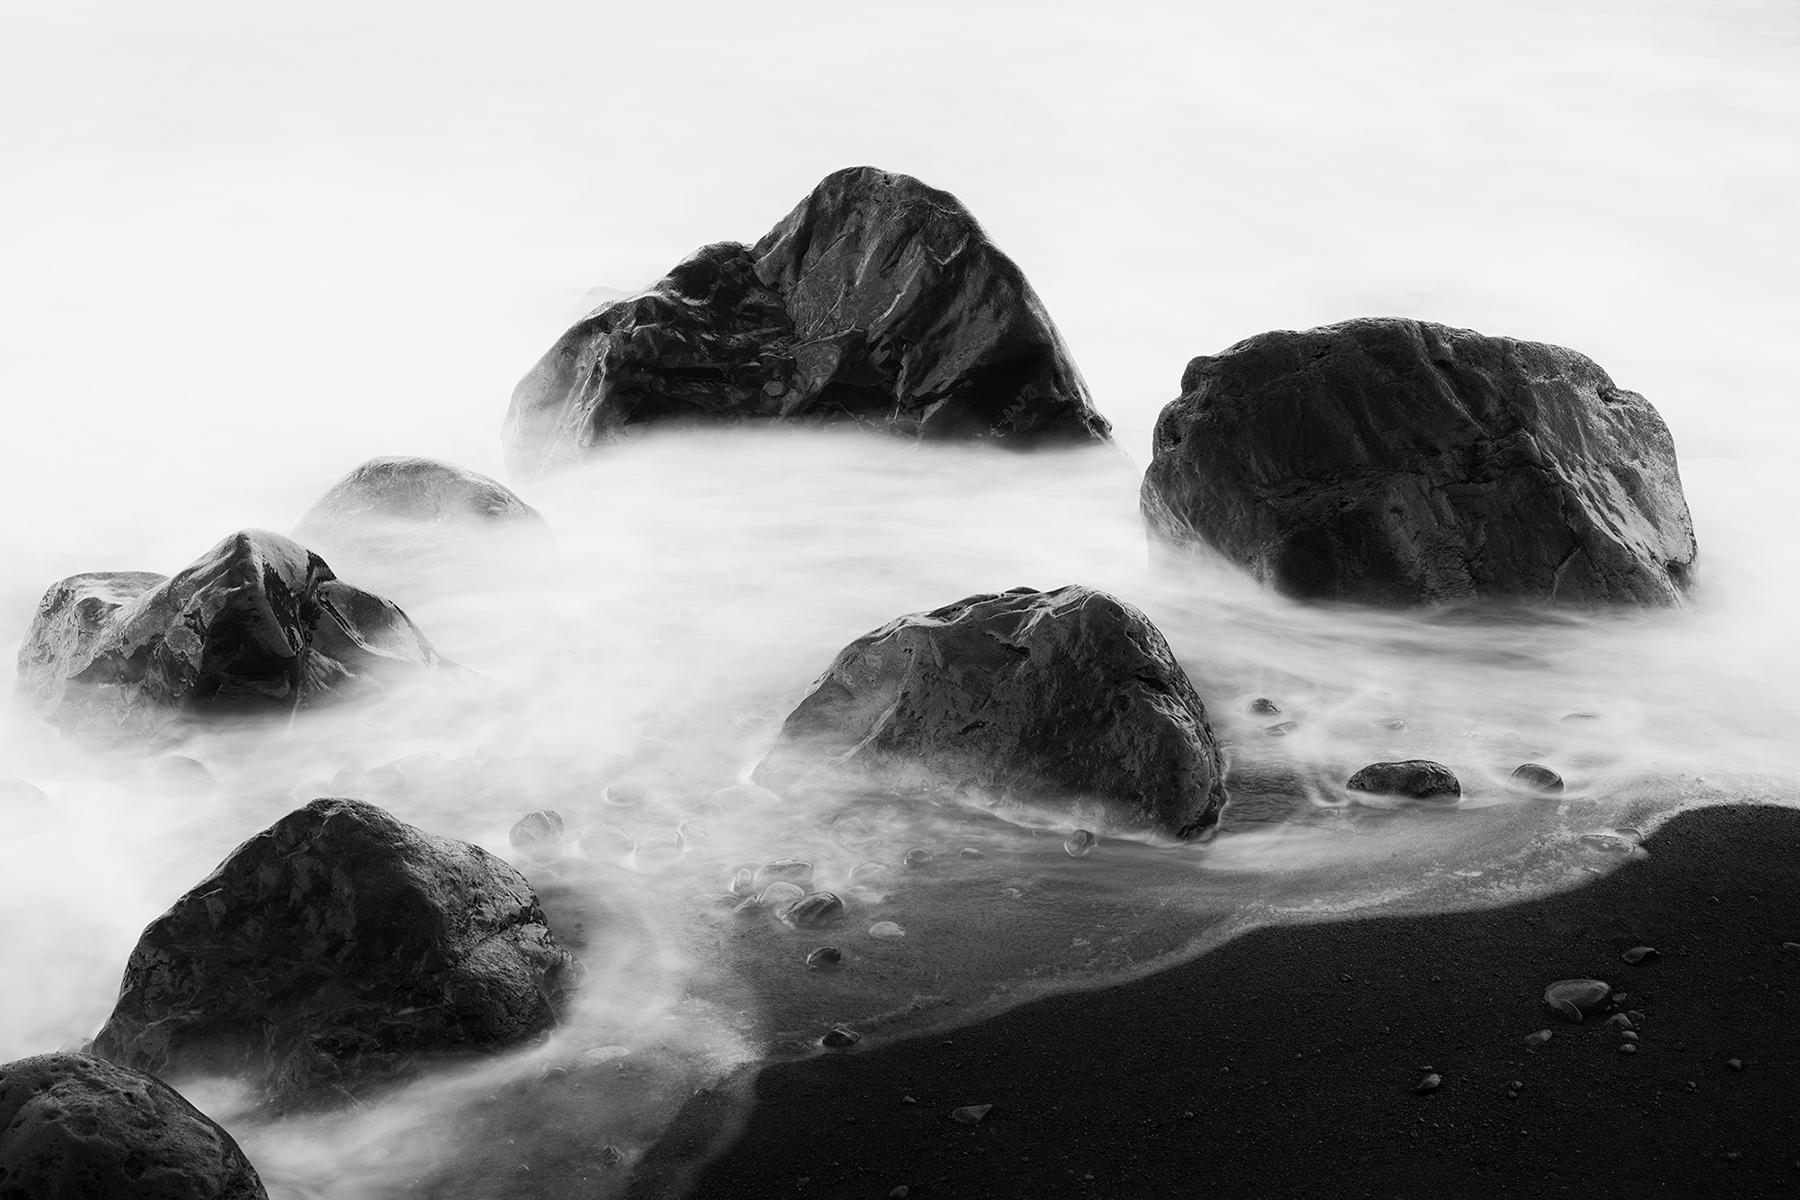 Gerald Berghammer Black and White Photograph - Black Rocks and a few Stones, black and white fine art photography, landscape